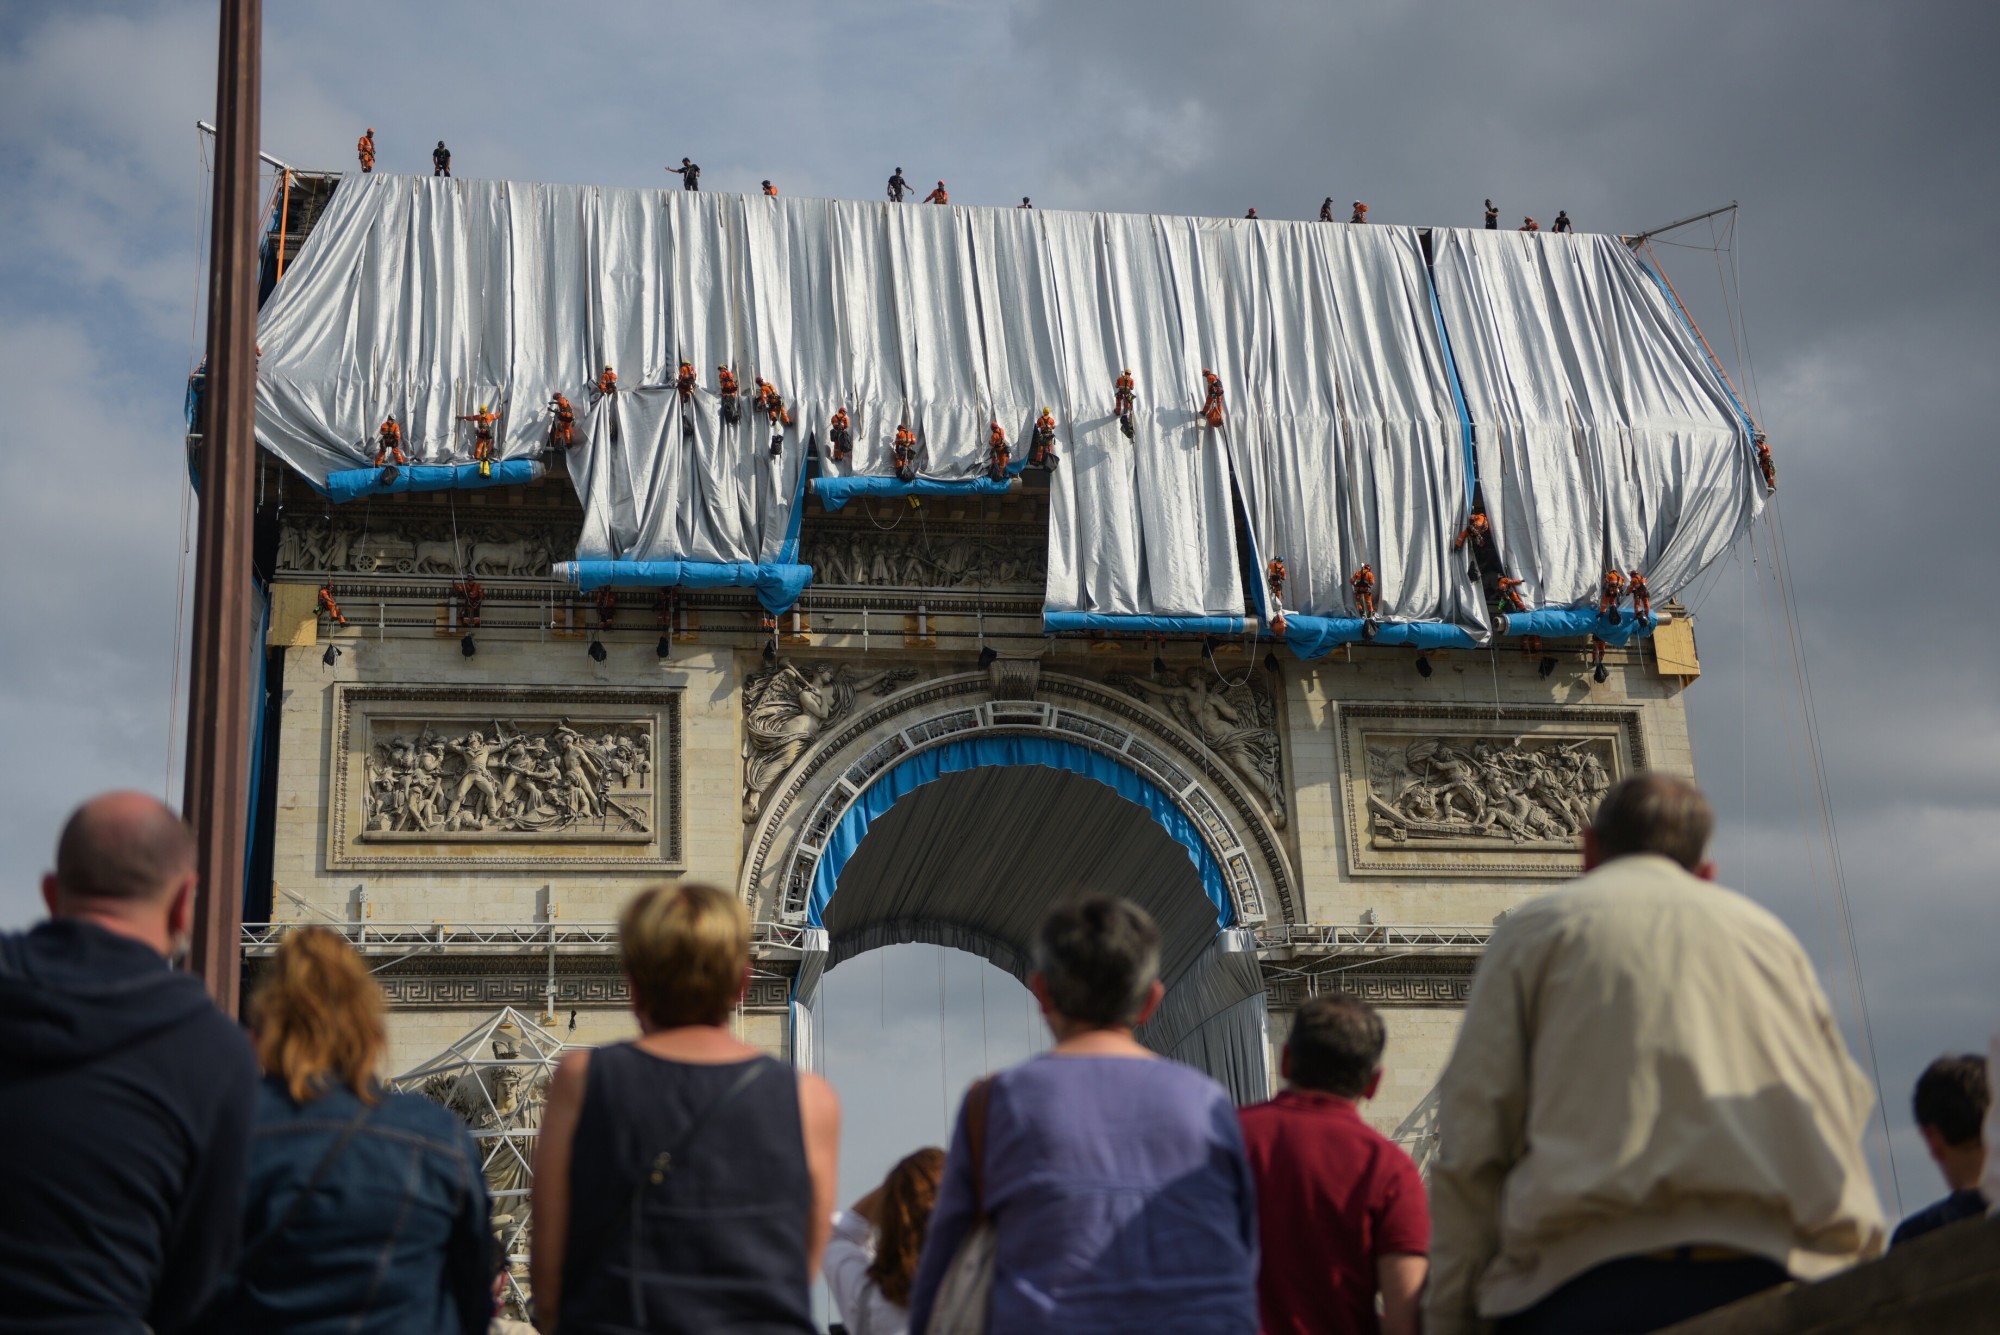 Fabric panels are unfurled in front of the outer walls of the Arc de Triomphe Benjamin Loyseau © 2021 Christo and Jeanne-Claude Foundation title=